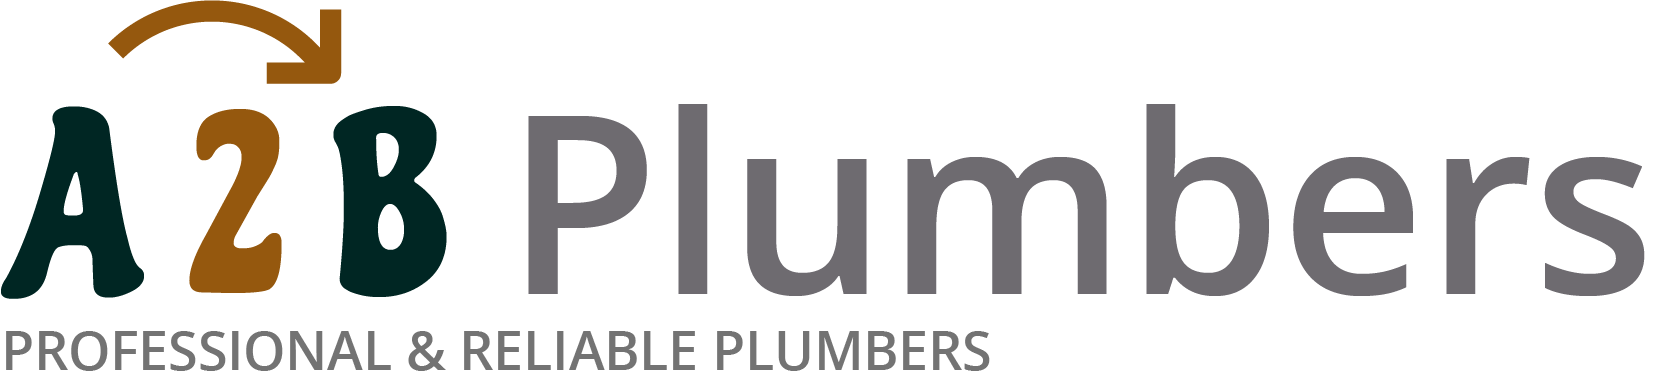 If you need a boiler installed, a radiator repaired or a leaking tap fixed, call us now - we provide services for properties in Wimborne Minster and the local area.